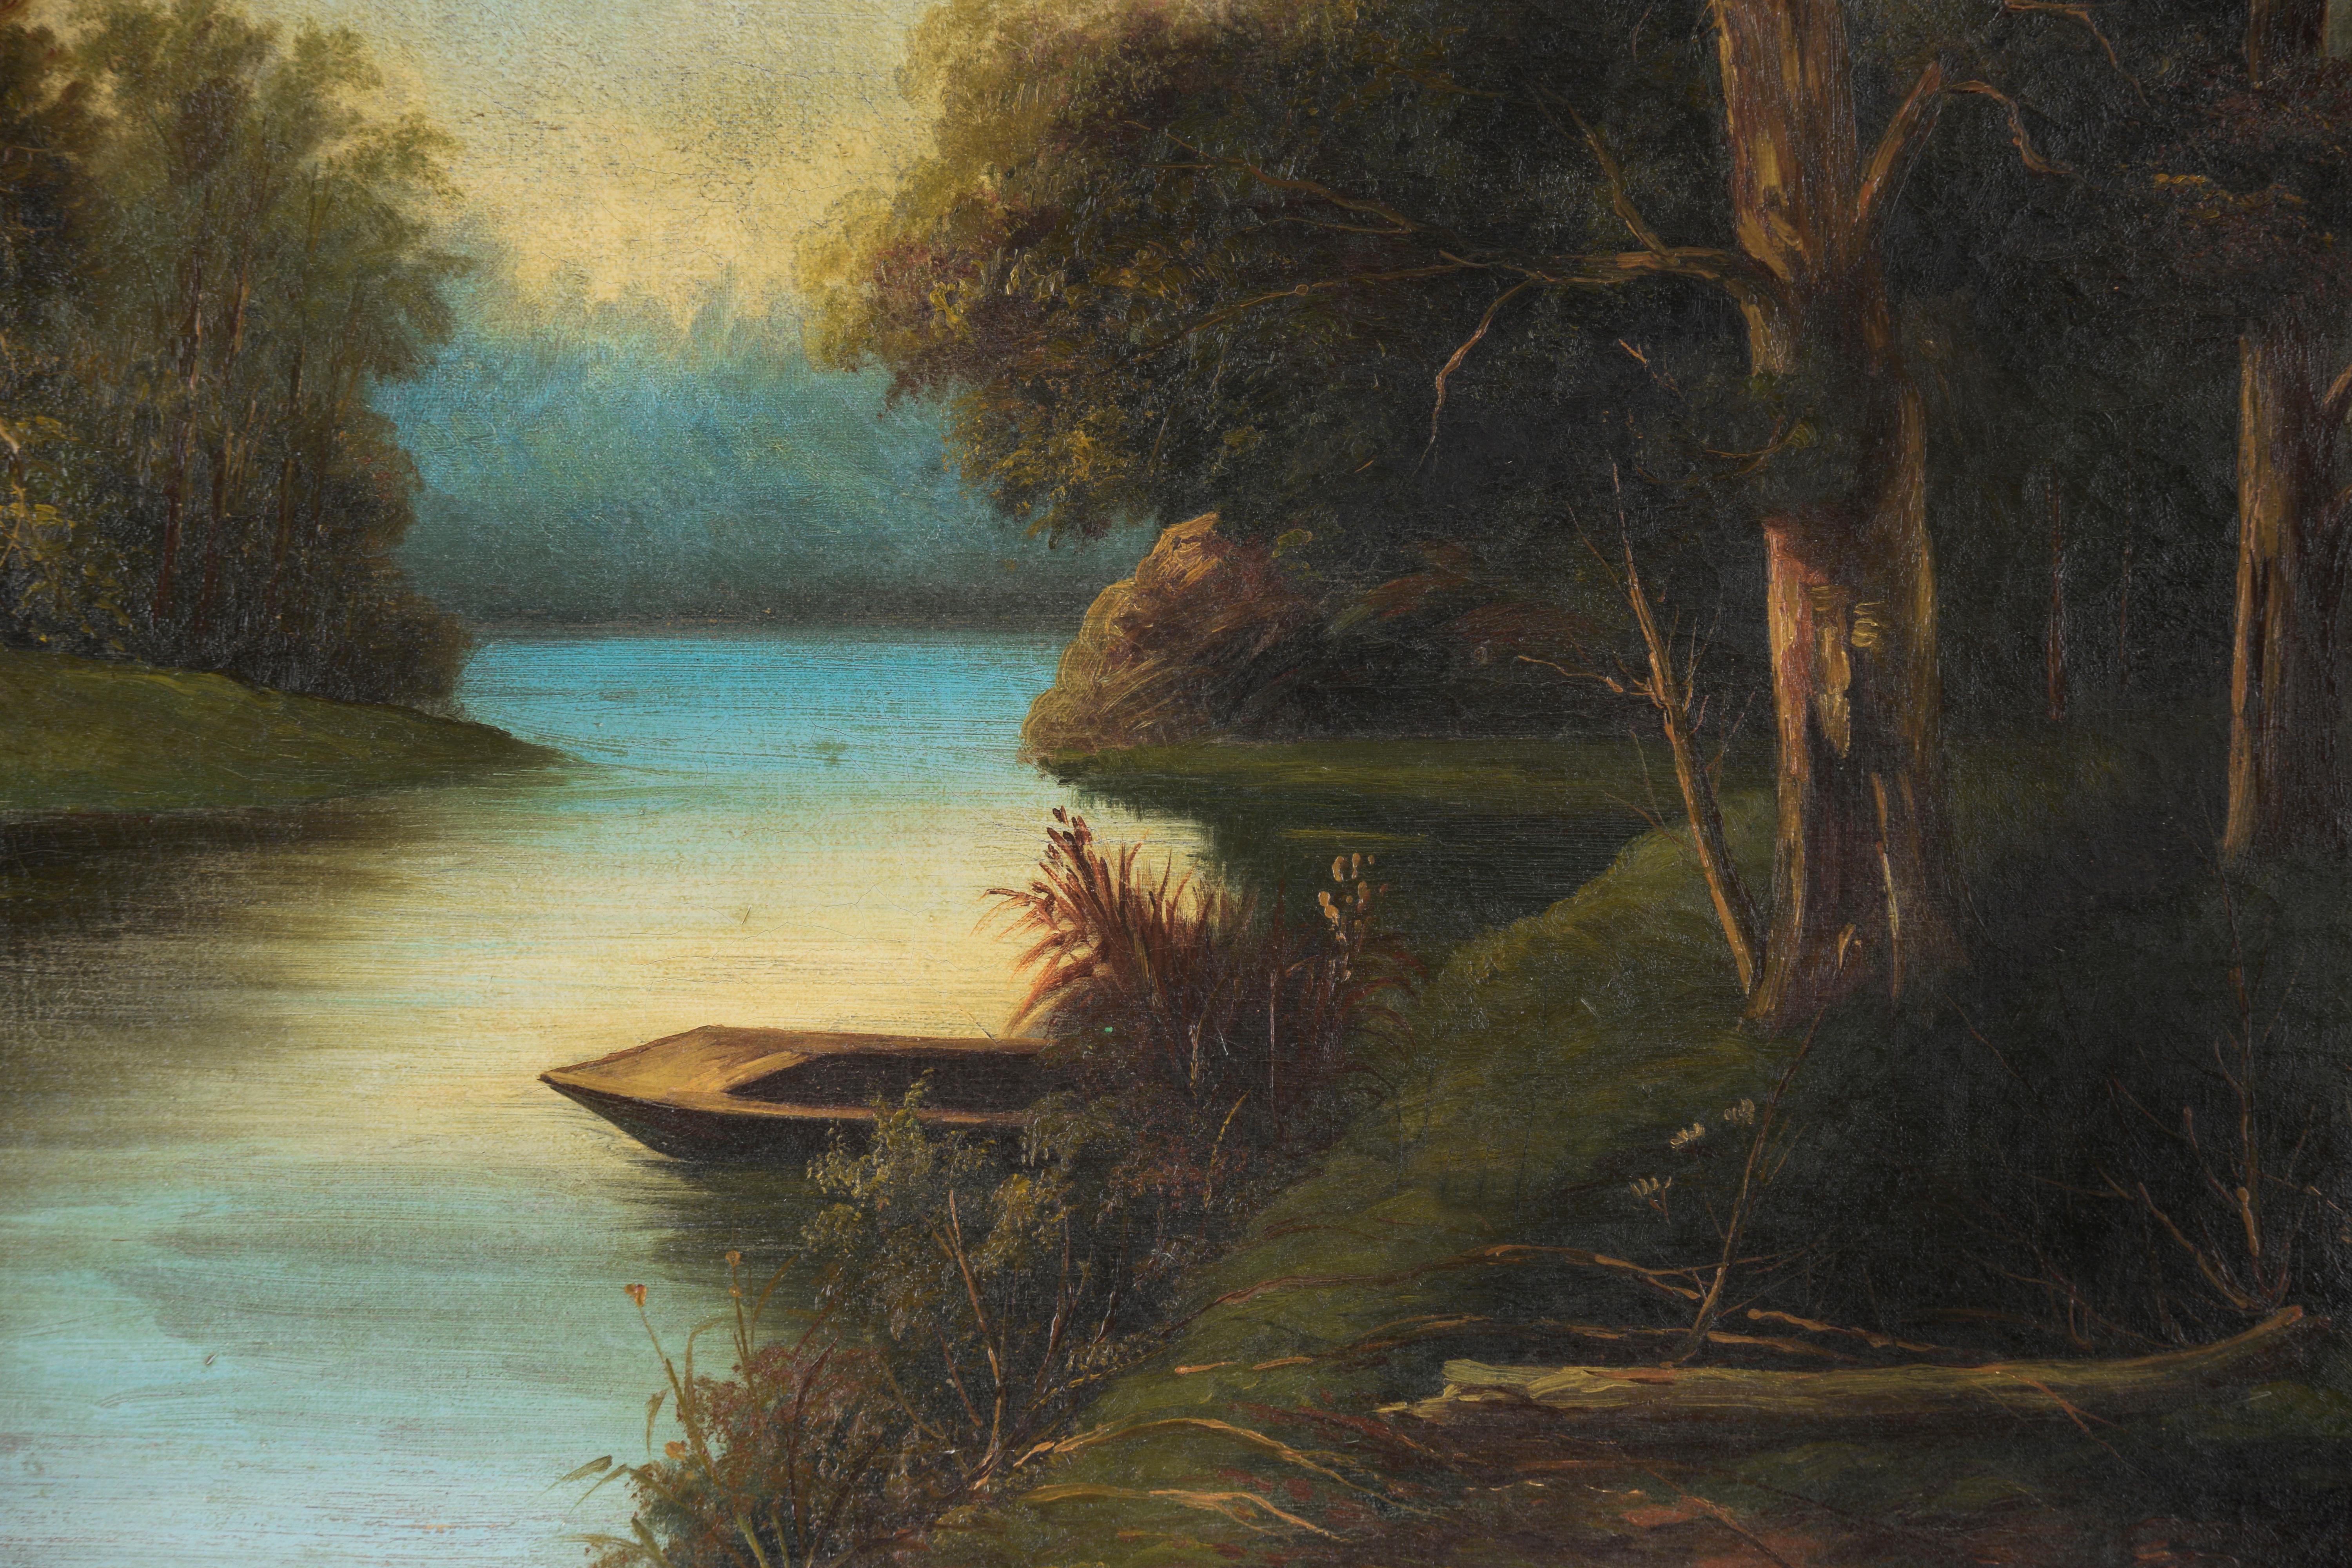 Boat on The Hudson River, Style of Robert Seldon Duncanson - Oil on Canvas - Painting by Unknown